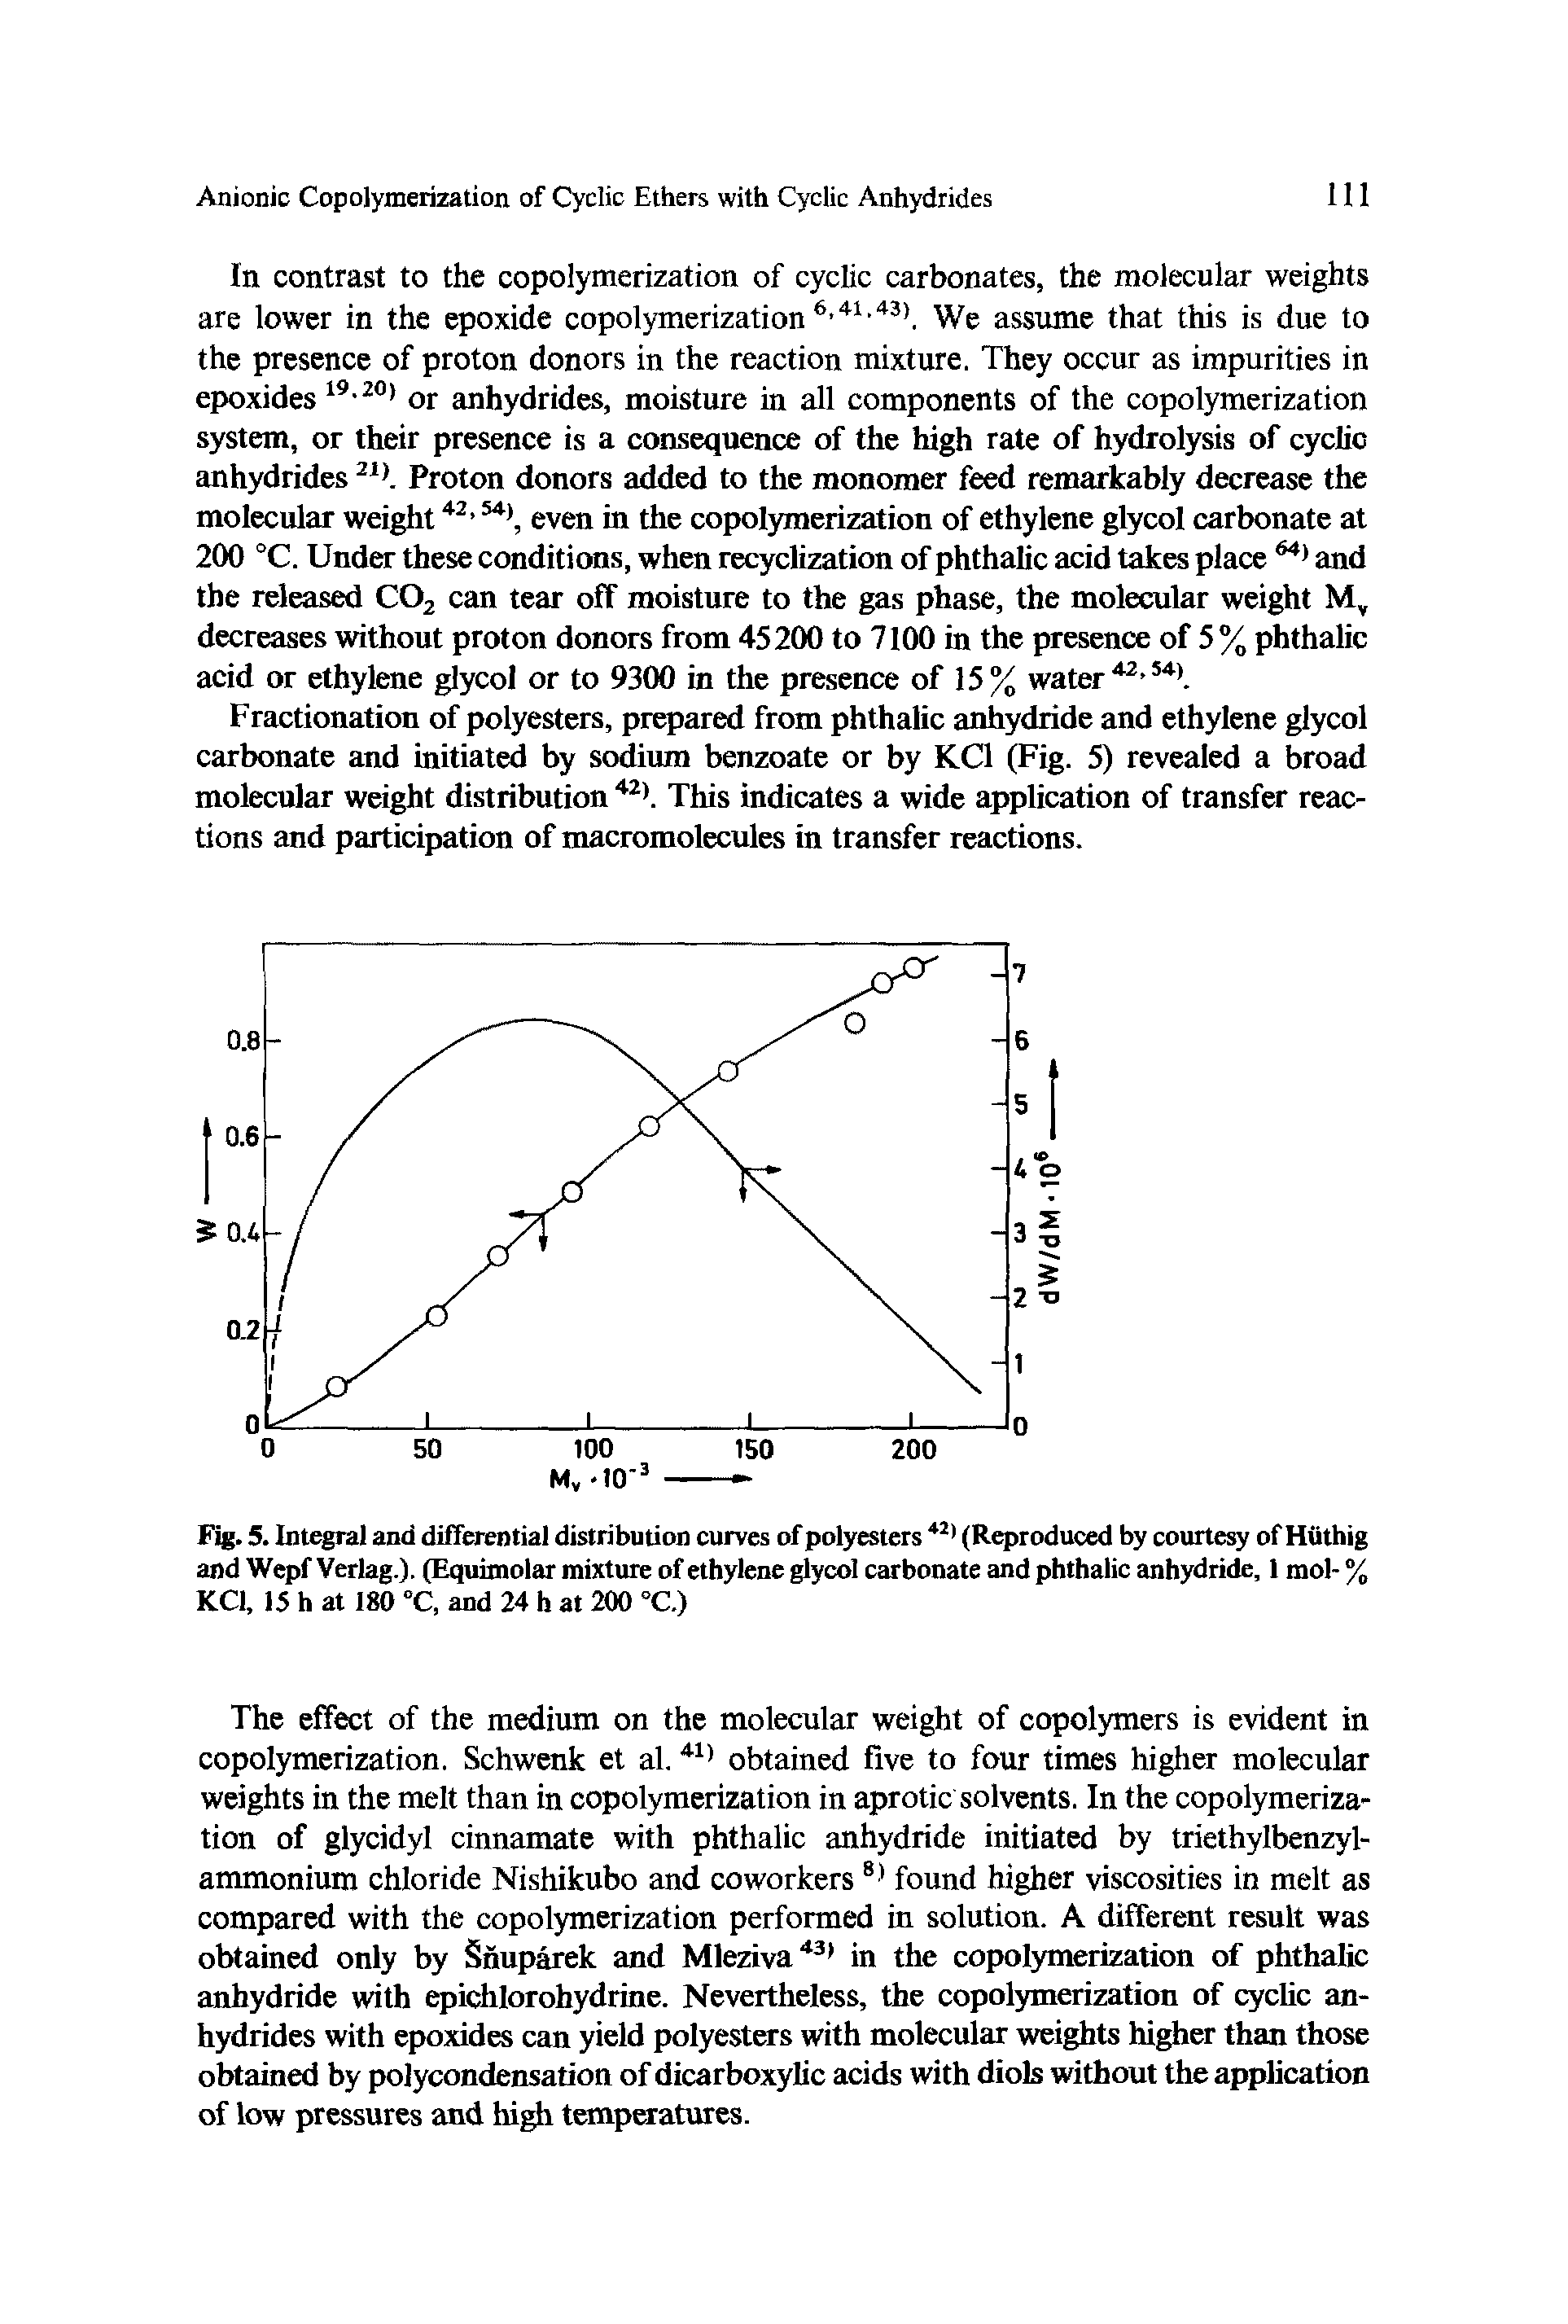 Fig. 5. Integral and differential distribution curves of polyesters 421 (Reproduced by courtesy of Hiithig and Wepf Verlag.). (Equimolar mixture of ethylene glycol carbonate and phthalic anhydride, 1 mol- % KC1, 15 h at 180 °C, and 24 h at 200 °C.)...